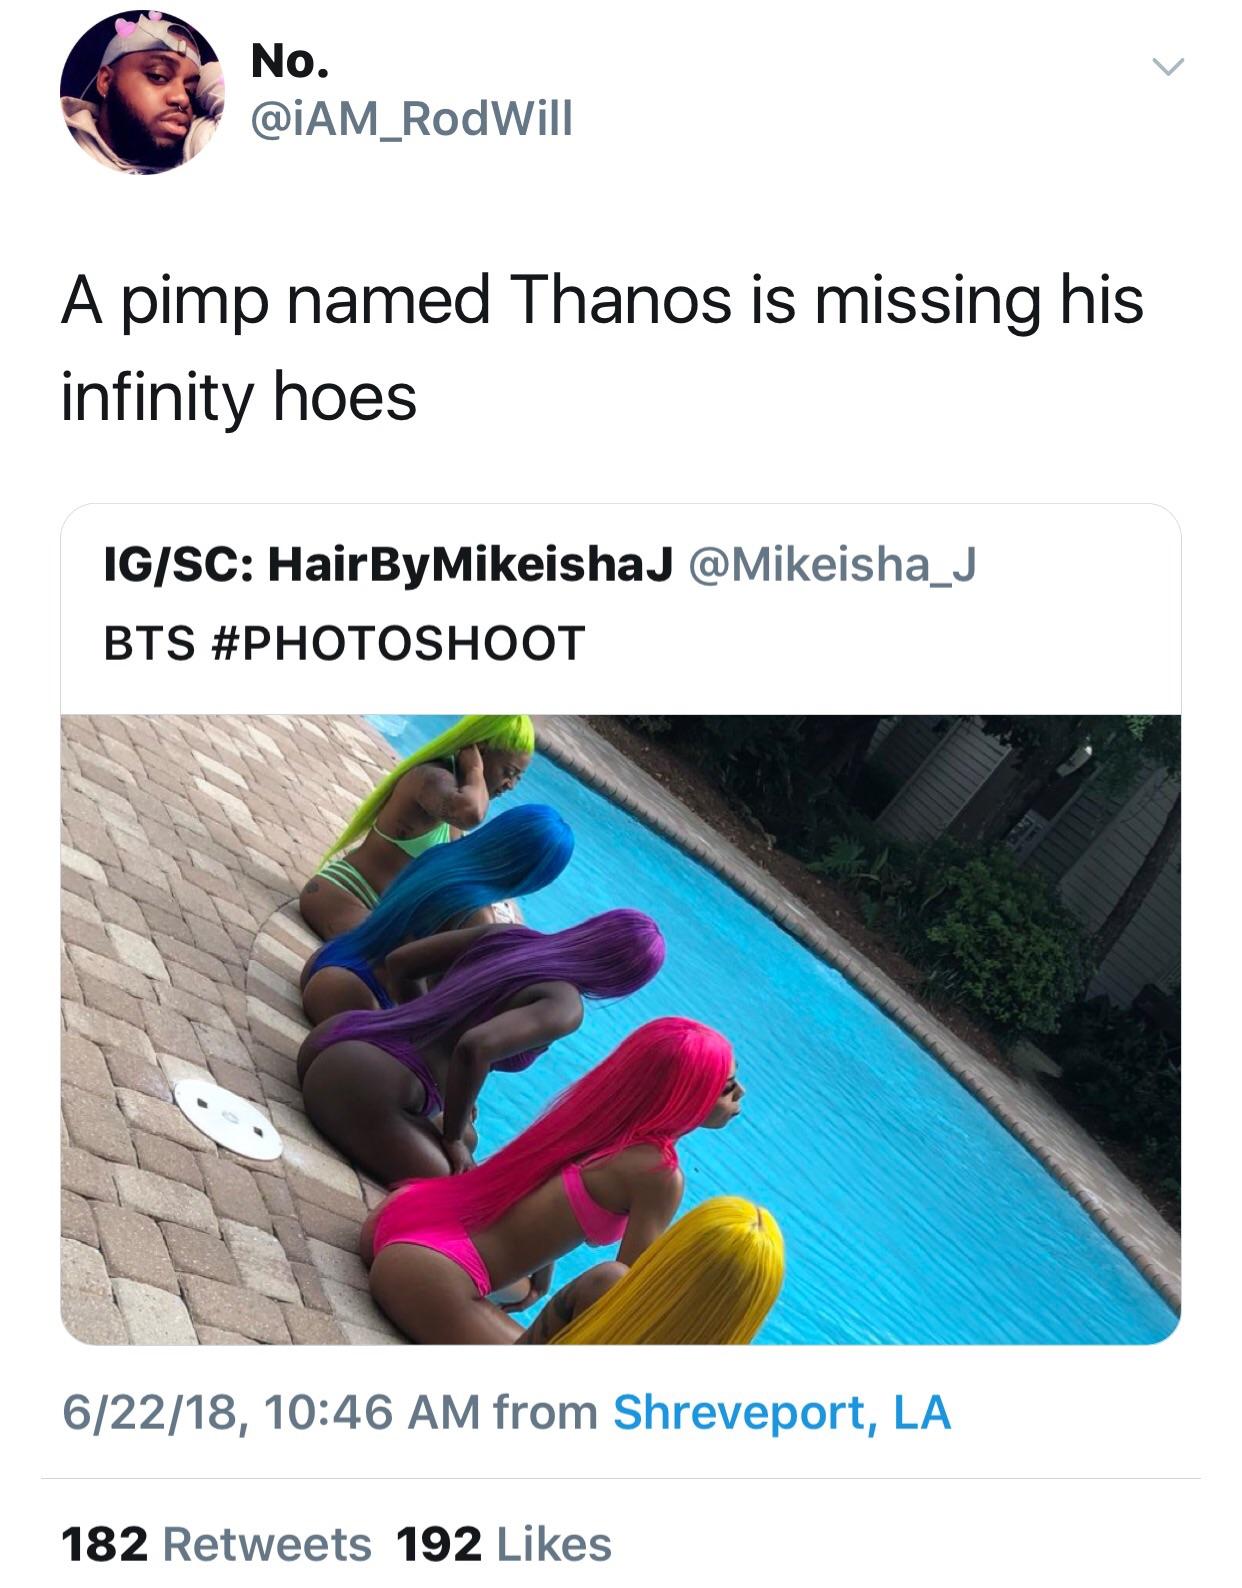 thanos infinity hoes - No. A pimp named Thanos is missing his infinity hoes IgSc HairByMikeishaJ Bts 62218, from Shreveport, La 182 192